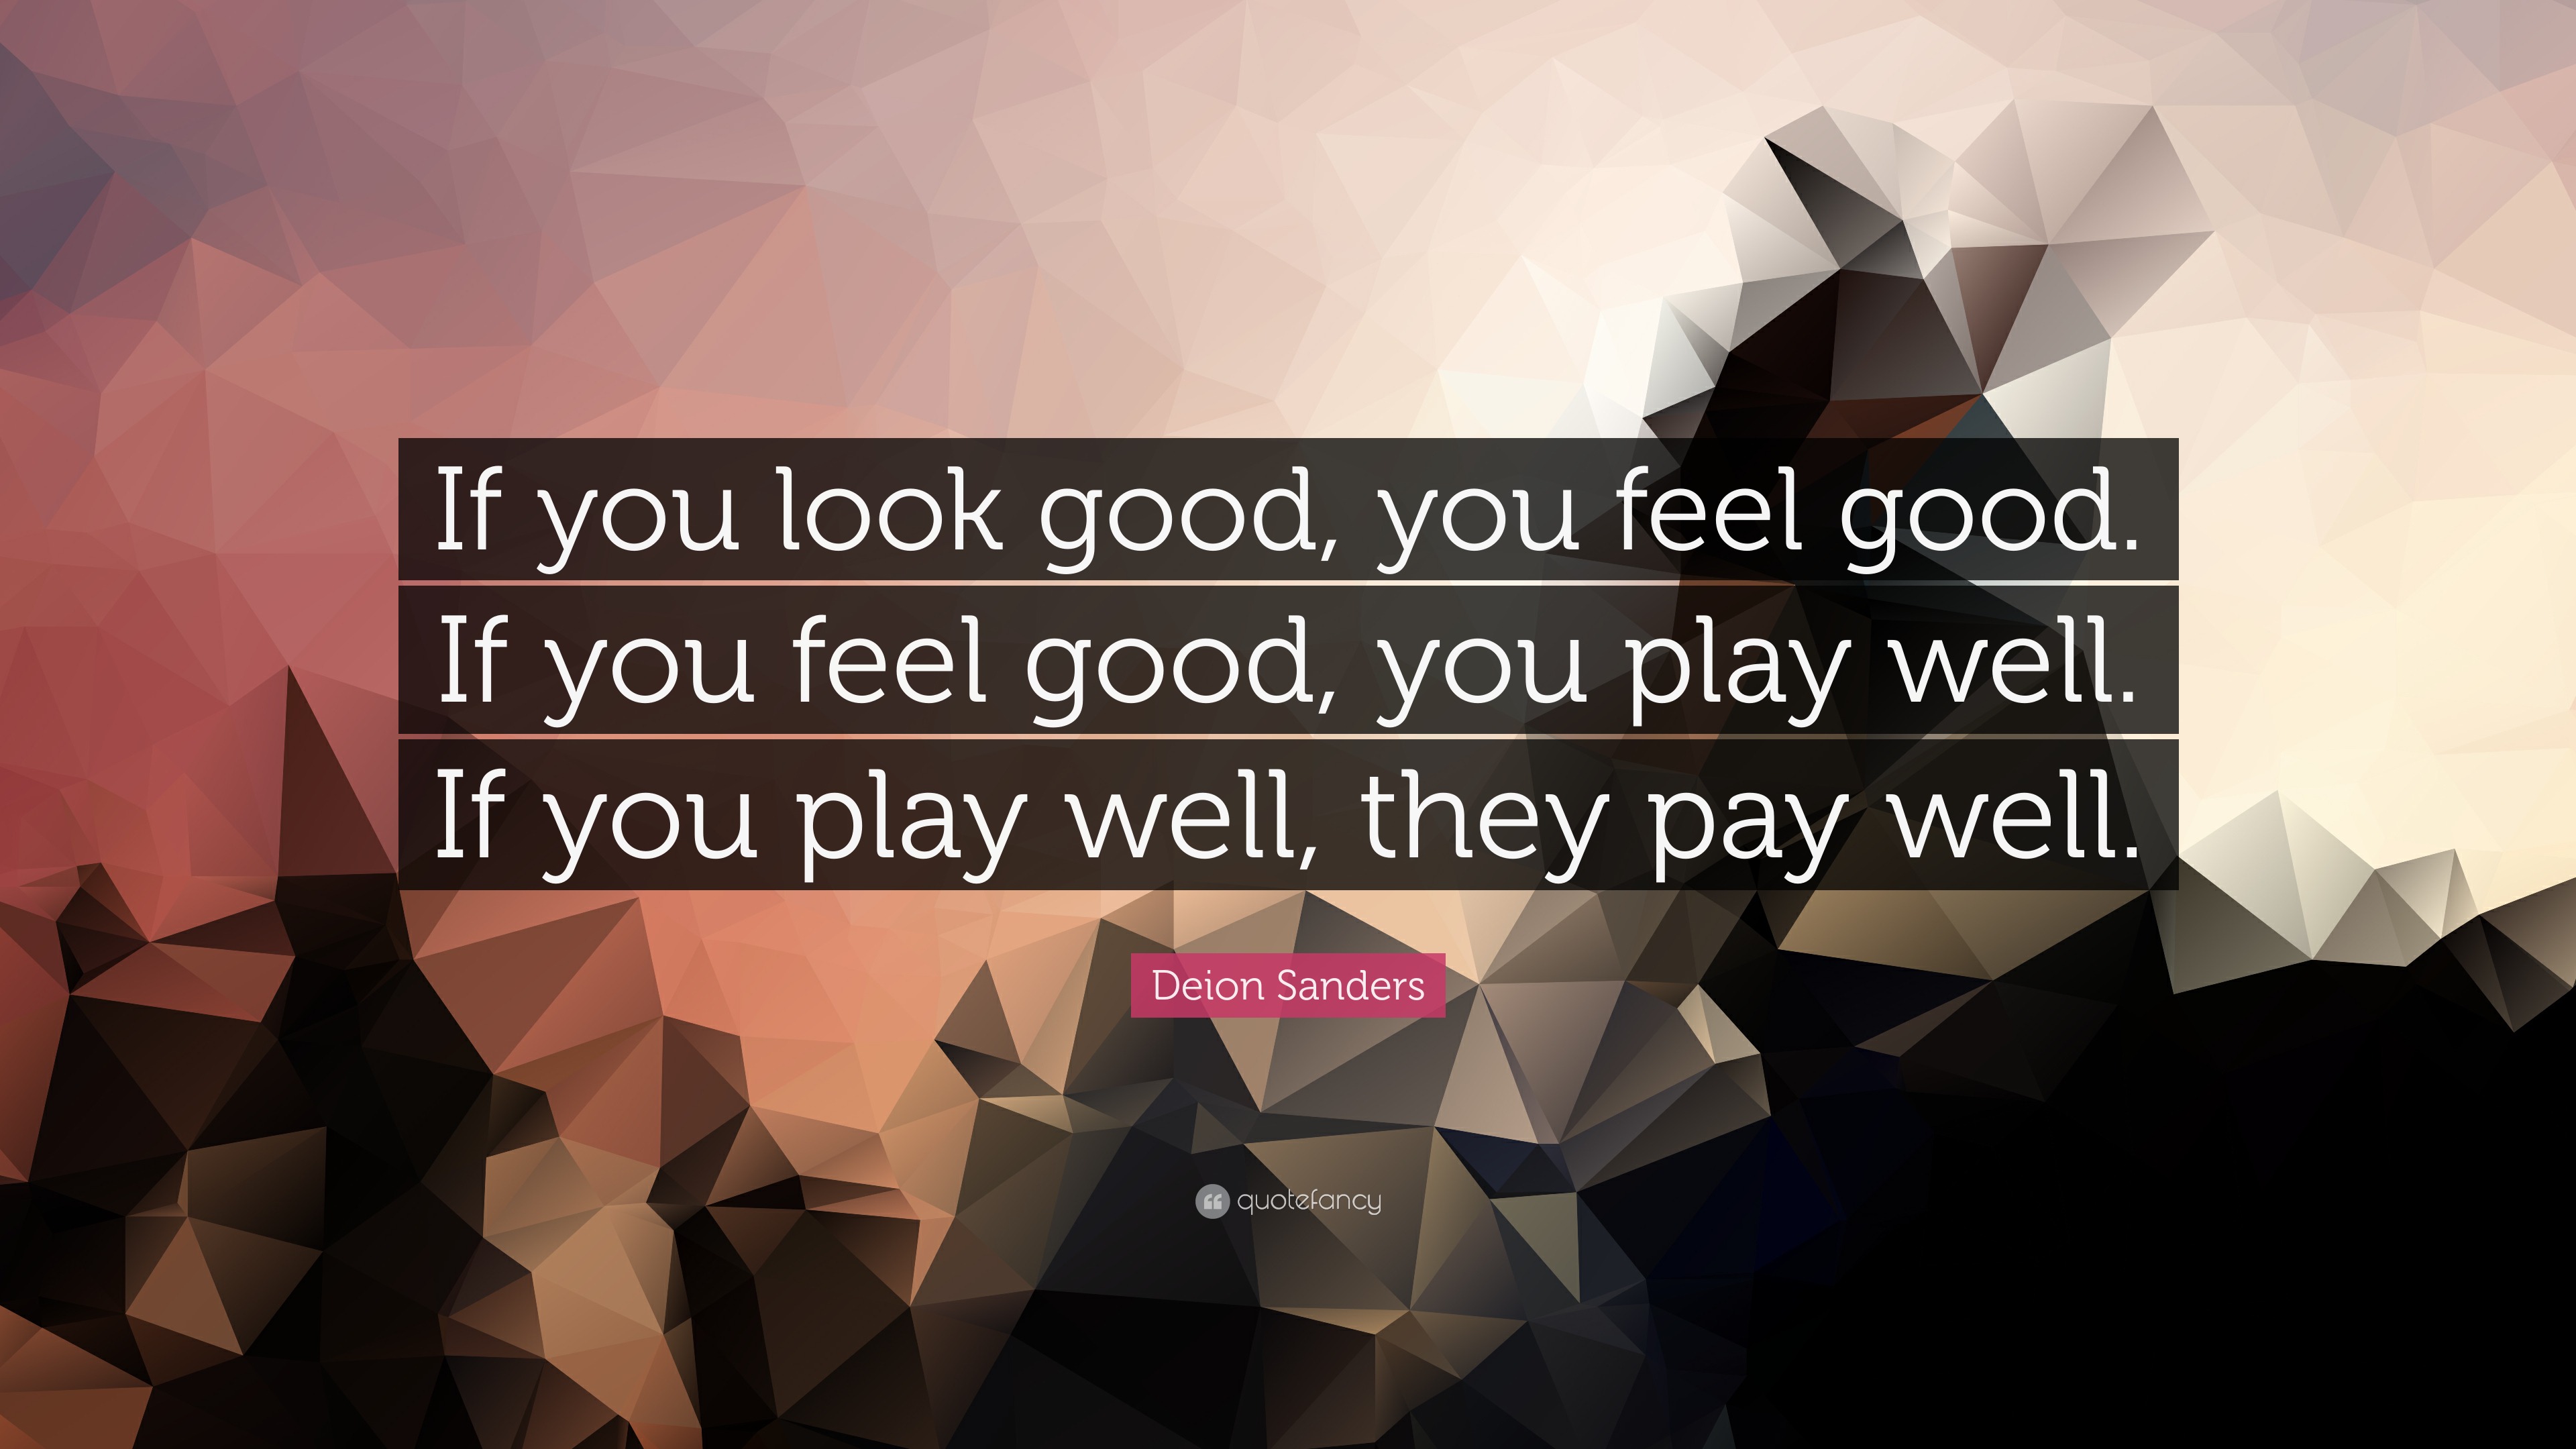 Deion Sanders quote: If you look good, you feel good, If you feel